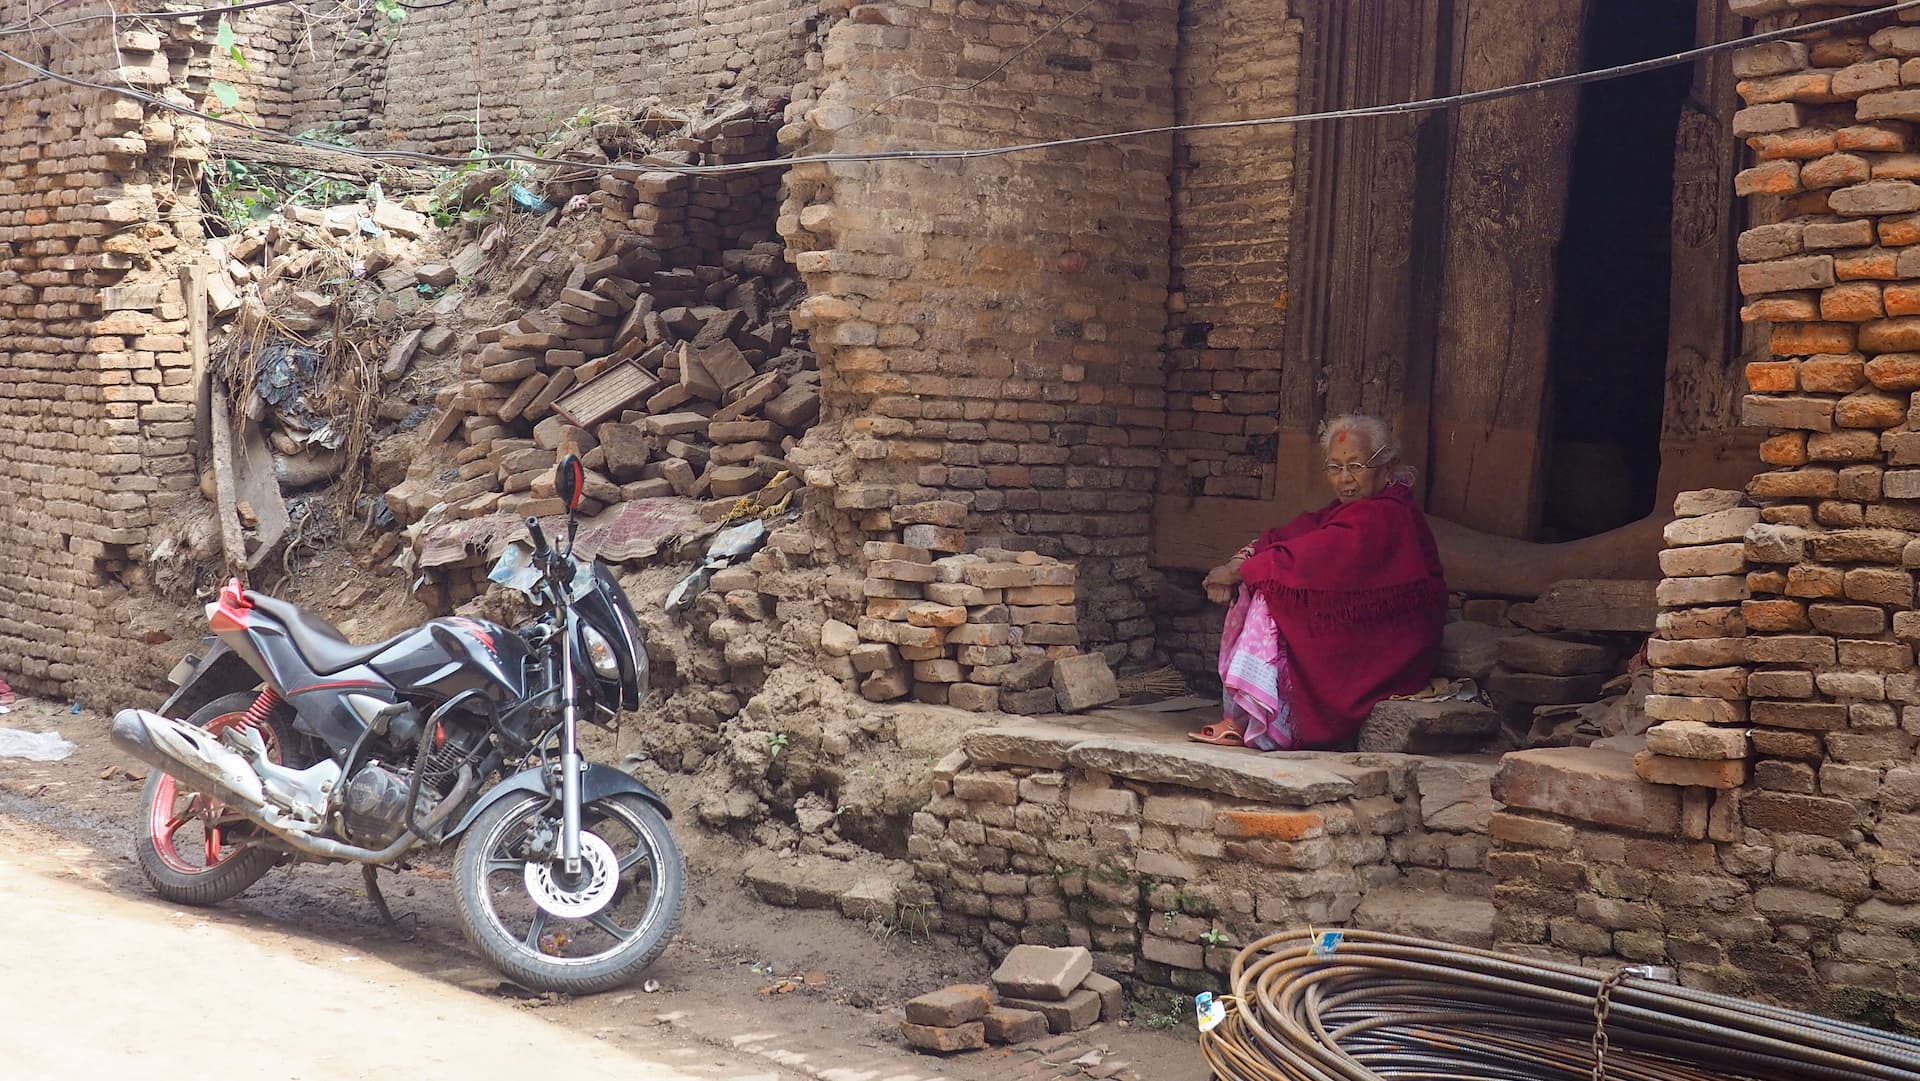 A woman in red clothing sits in a doorstep next to rubble and a motorcycle